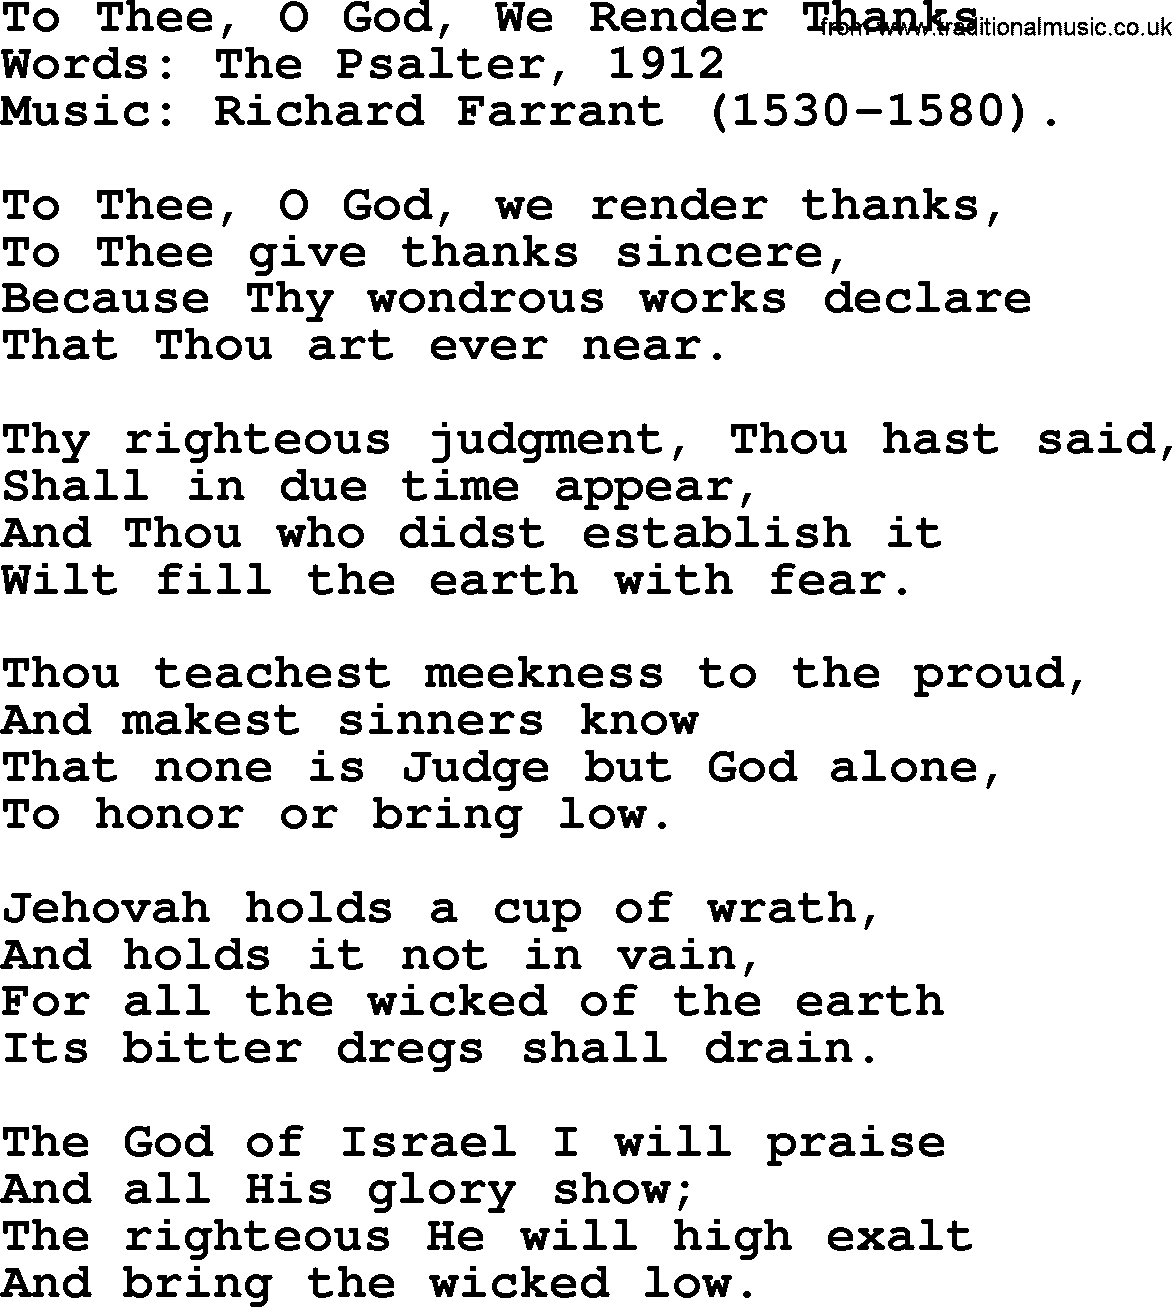 Thanksgiving Hymns and Songs: To Thee, O God, We Render Thanks lyrics with PDF